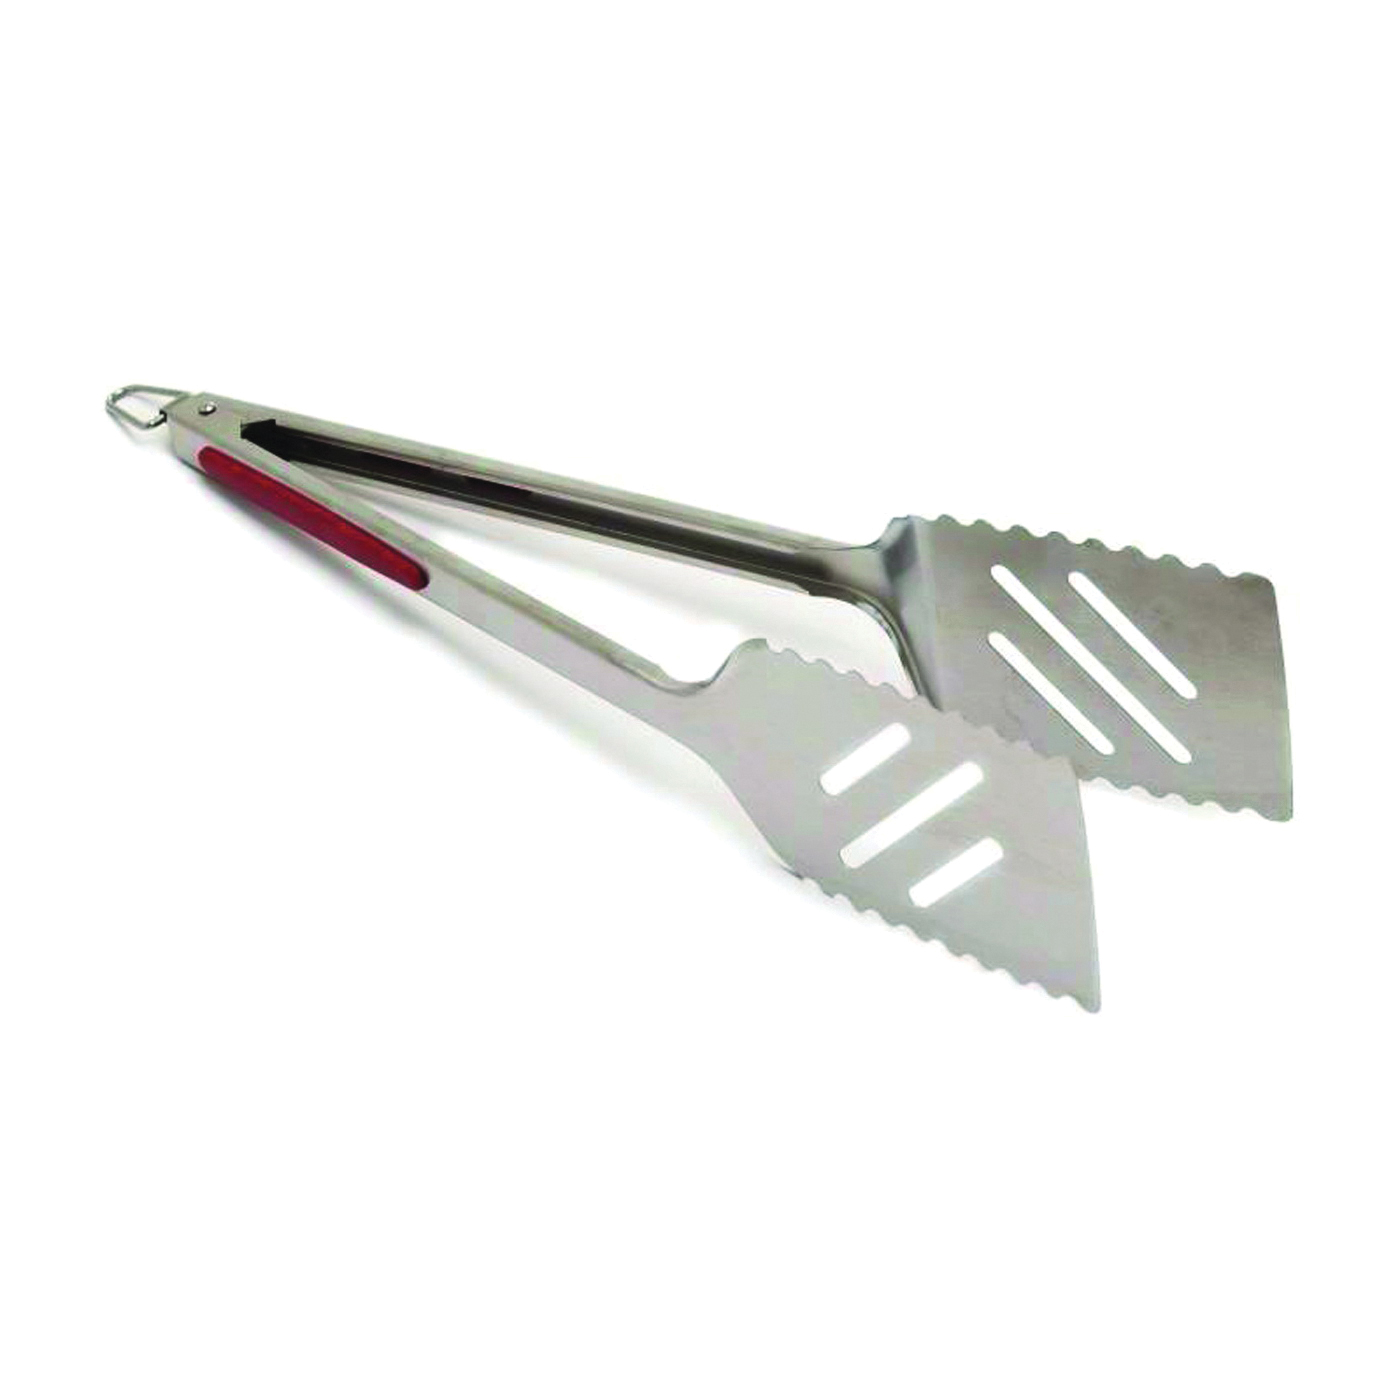 40240 Turner/Tong Combination, 16 in L, Stainless Steel, Silver